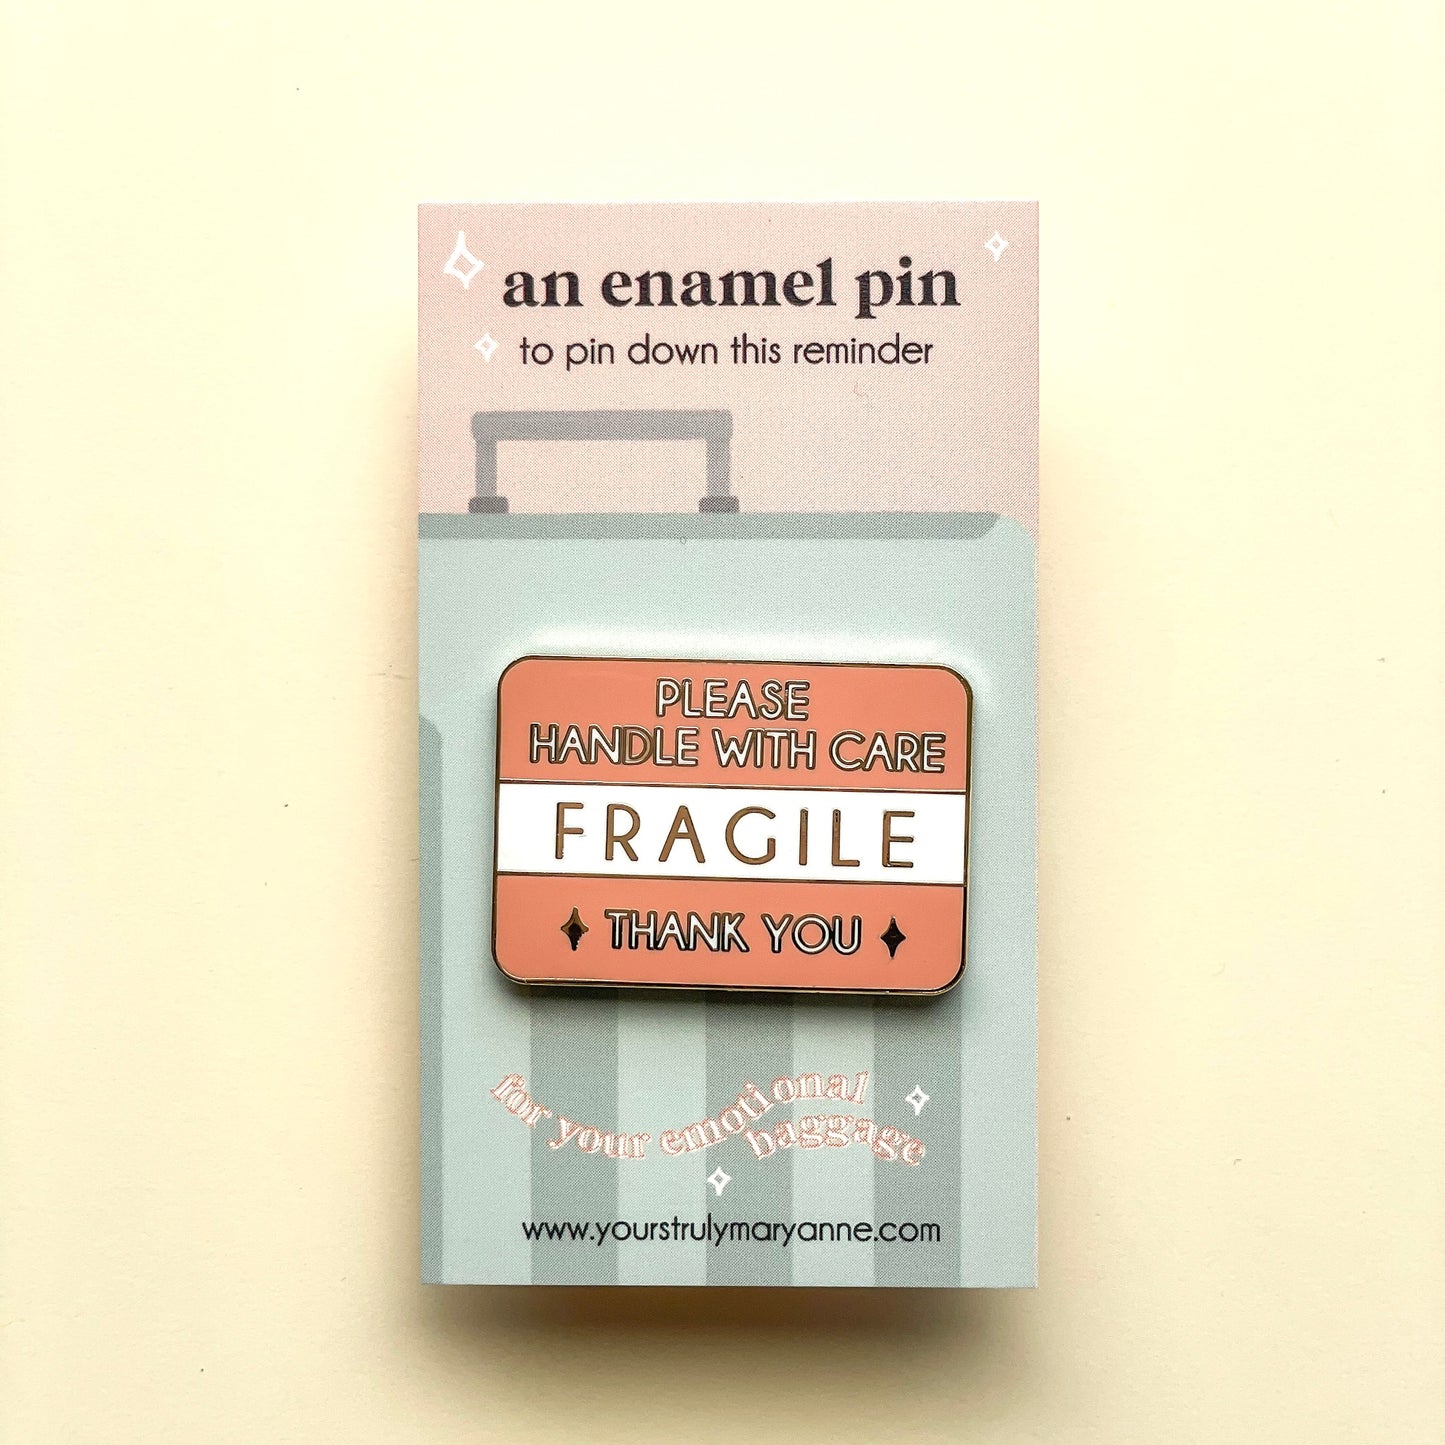 Fragile, Handle with Care Enamel Pin